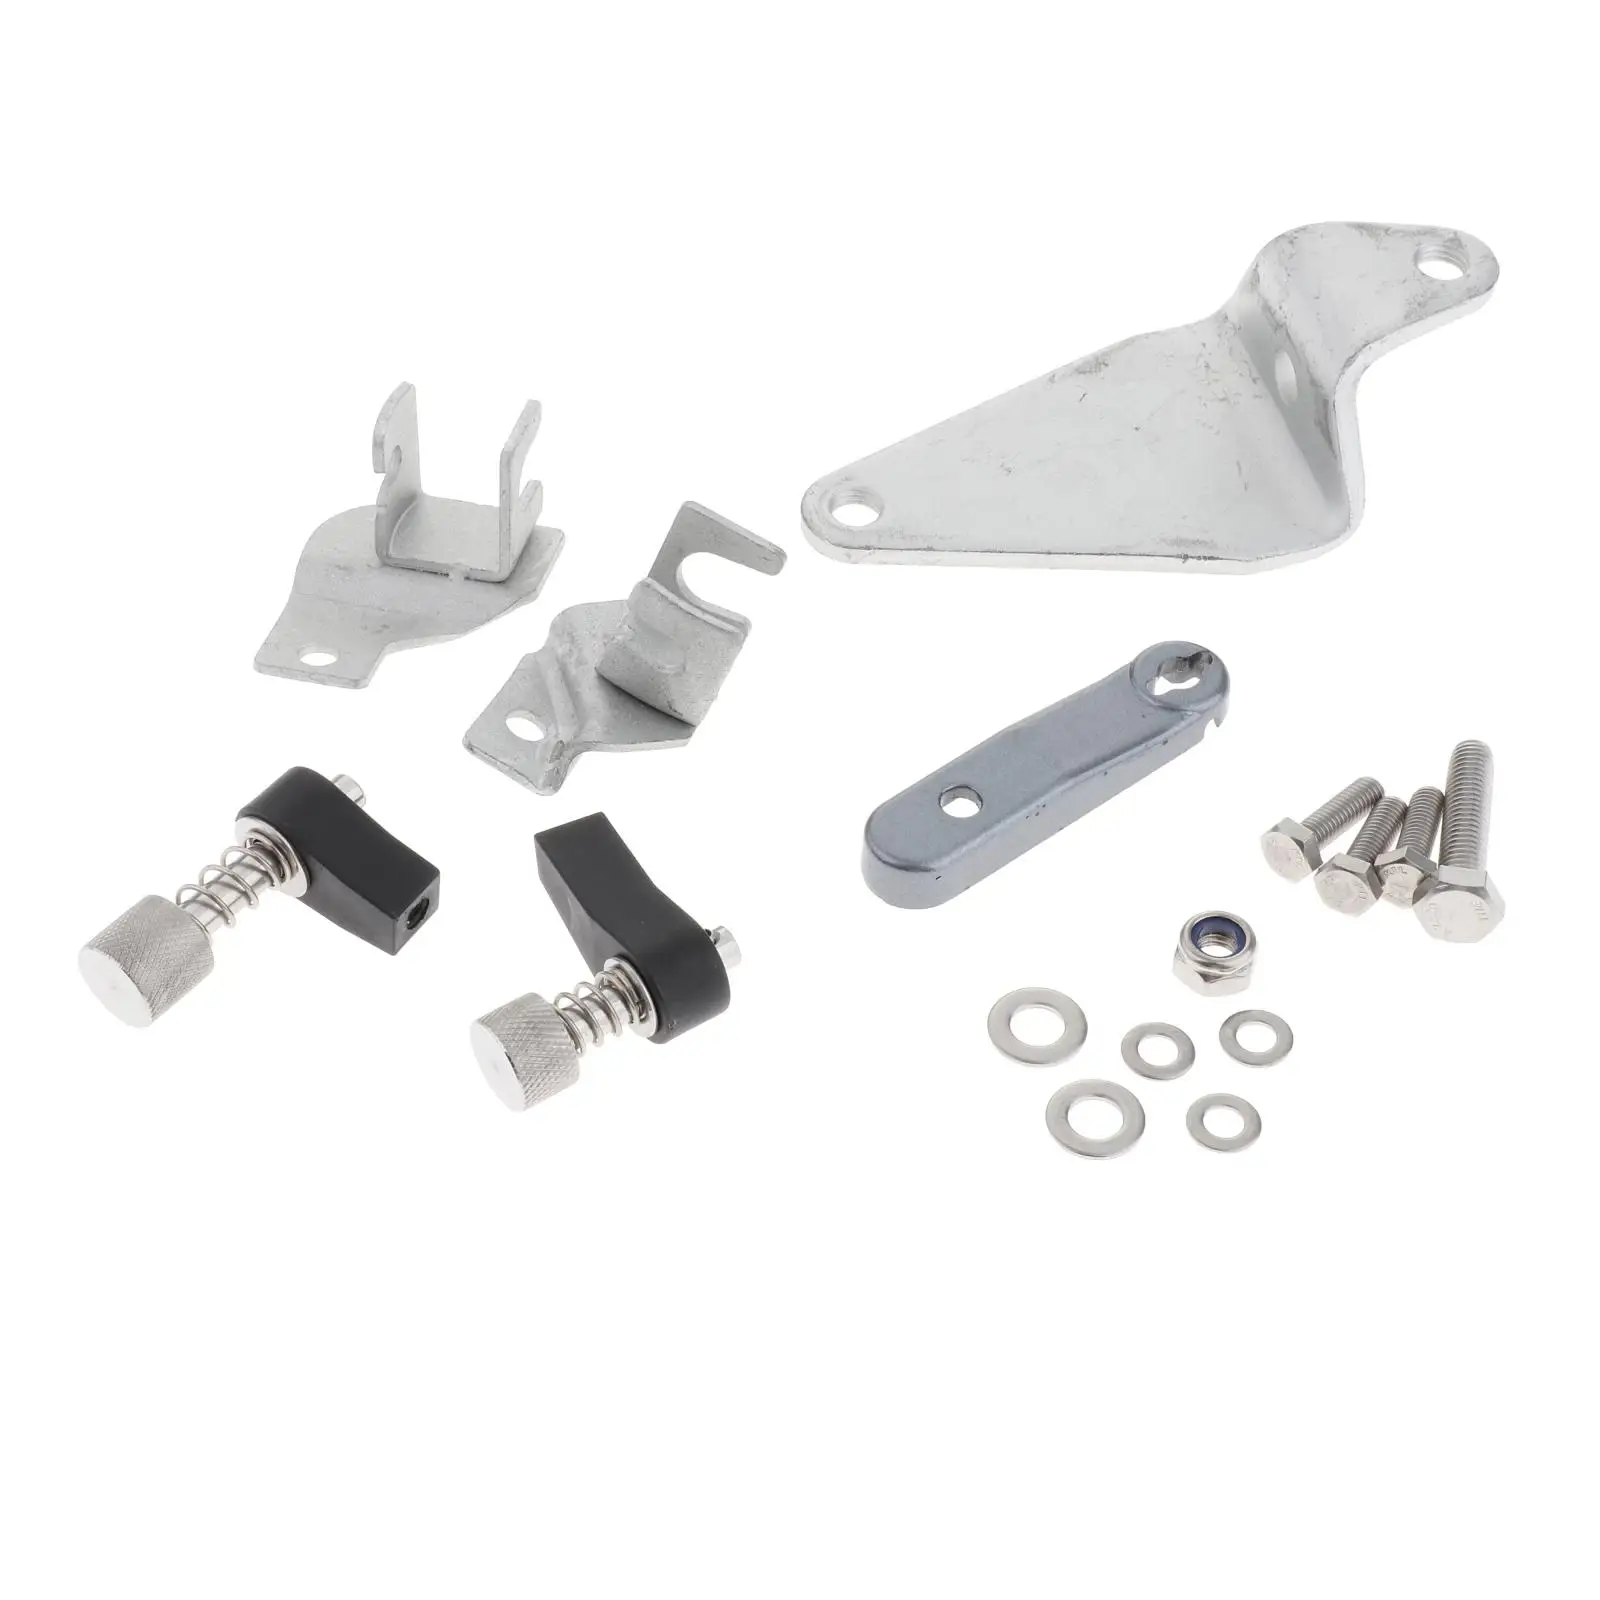 Boat Motor 689-48501-21-4D Remote Control Accessories Kits For Yamaha Parsun 30HP 2 Stroke Outboard Motor